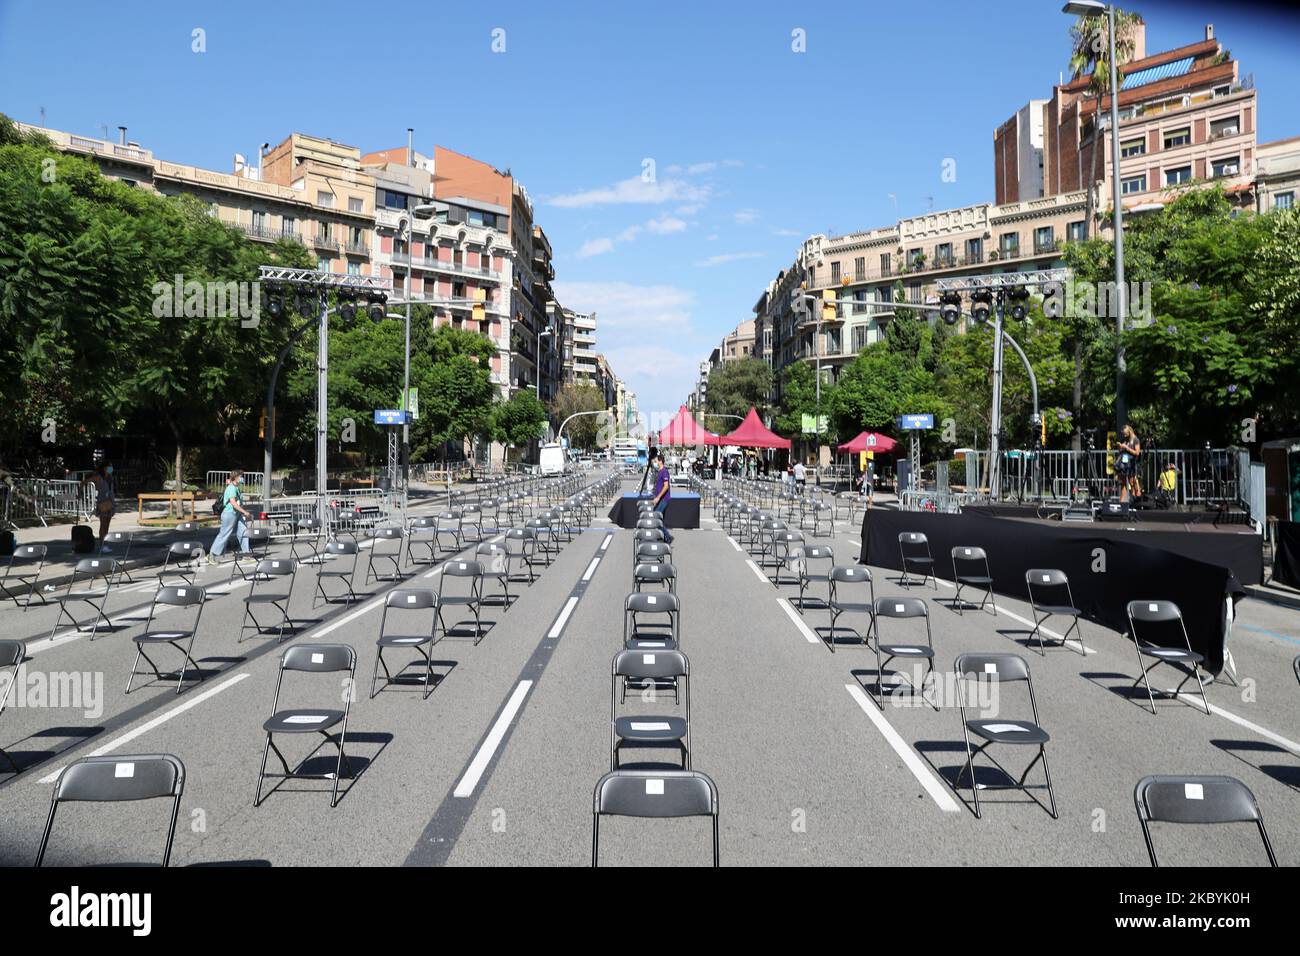 Chairs representing the number of lawsuits against separatists are placed in front of the Arc de Triomf marking the ''Diada'', national day of Catalonia, in Barcelona, Spain on September 11, 2020. (Photo by Joan Valls/Urbanandsport/NurPhoto) Stock Photo